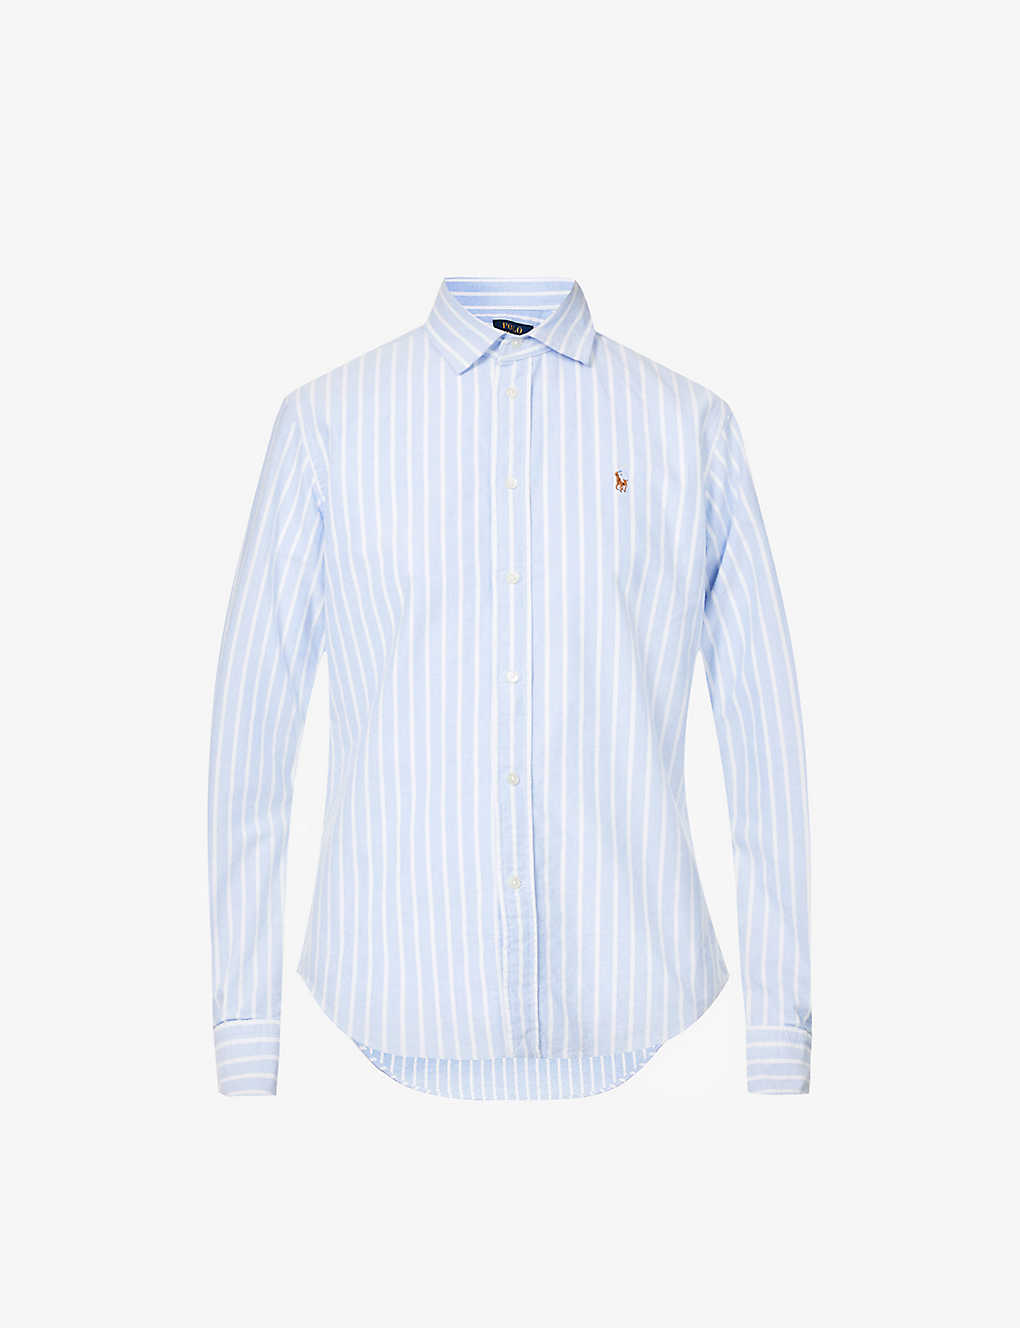 Polo Ralph Lauren Brand-embroidered Regular-fit Cotton Shirt In Harbor Island Blue/white